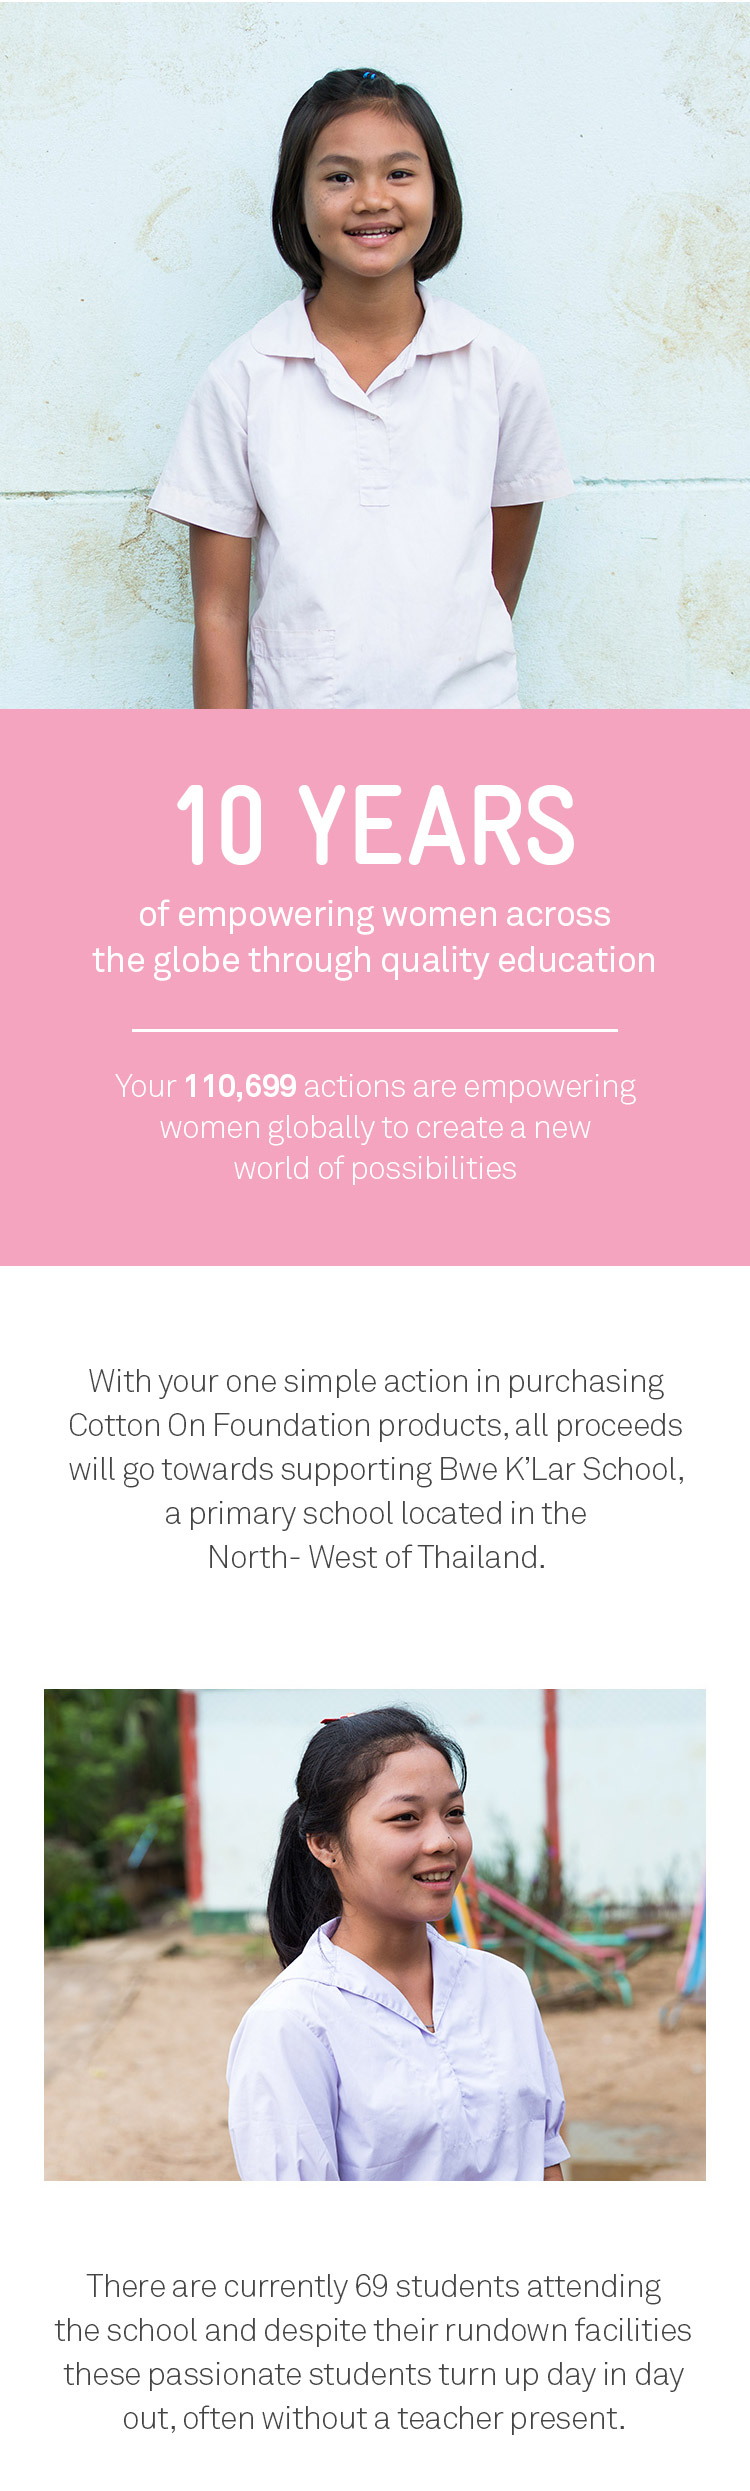 10 years of empowering women across the globe through quality education. With your simple action in purchasing Cotton On Foundation product, all proceeds will go towards suppirting Bew K'Lar School, in the North-West of Thailand. There are currently 69 students attending classes despite their run down facilities.